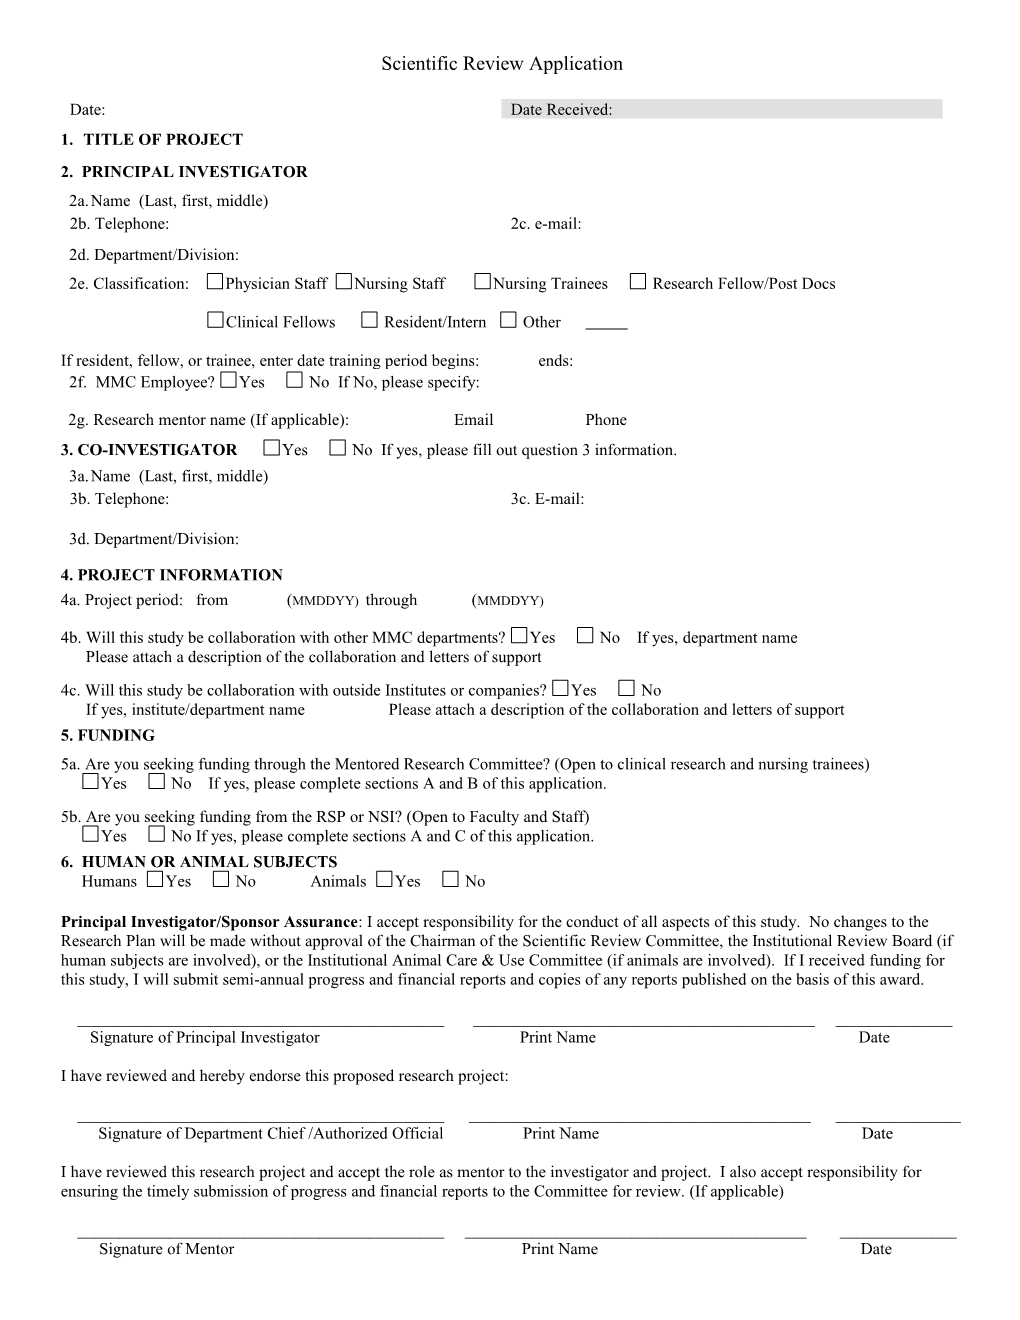 PHS 398, Fp1 (Rev. 6/09), Face Page, Form Page 1